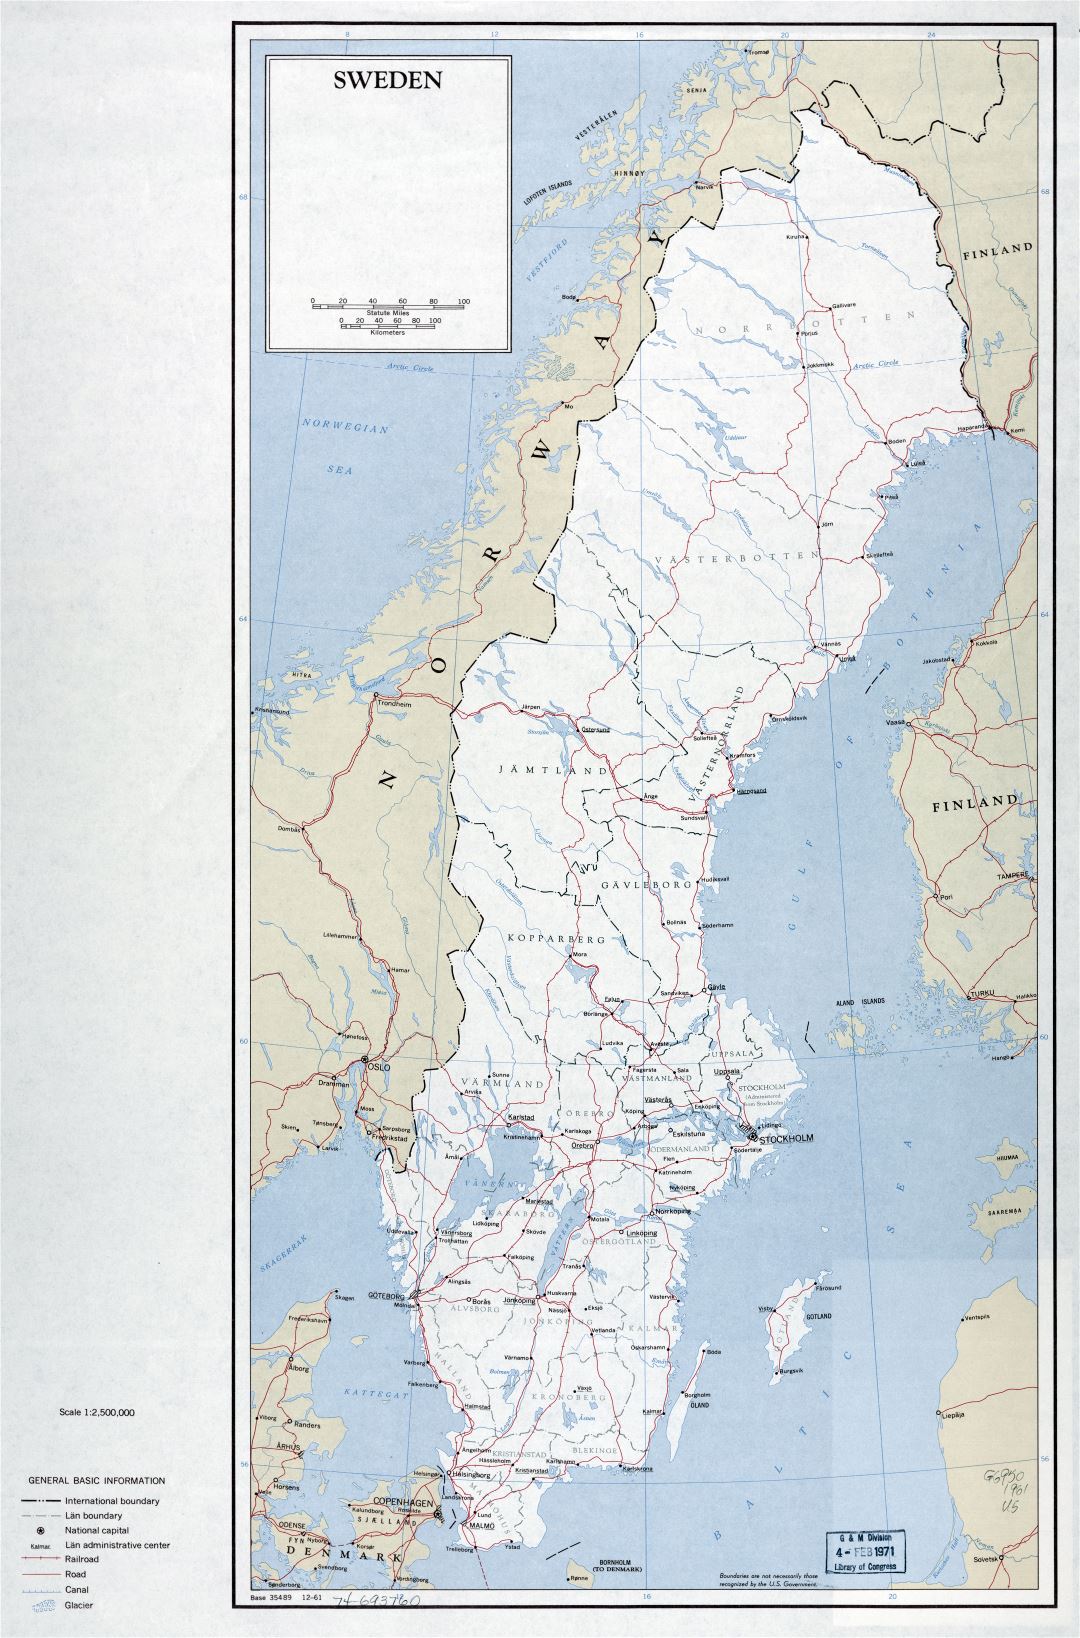 Large scale political and administrative map of Sweden with roads, railroads and major cities - 1961